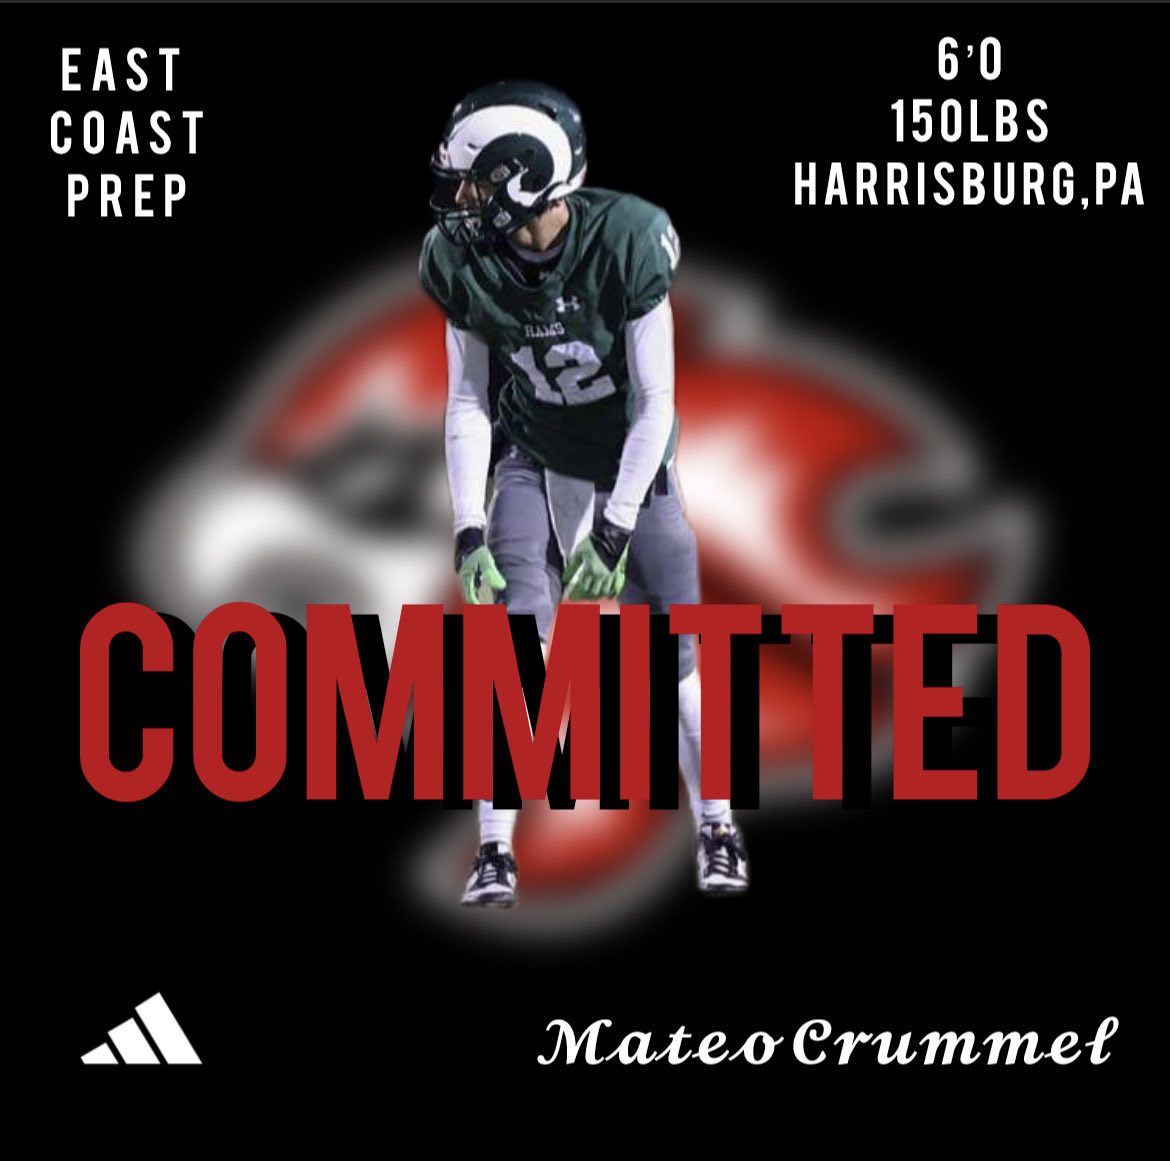 After taking official visits for both track and football; I have decided to commit to East Coast Prep for football and reclassify to the Class of 2025. @ECP_Football @toddavasey @Abaskerville_7